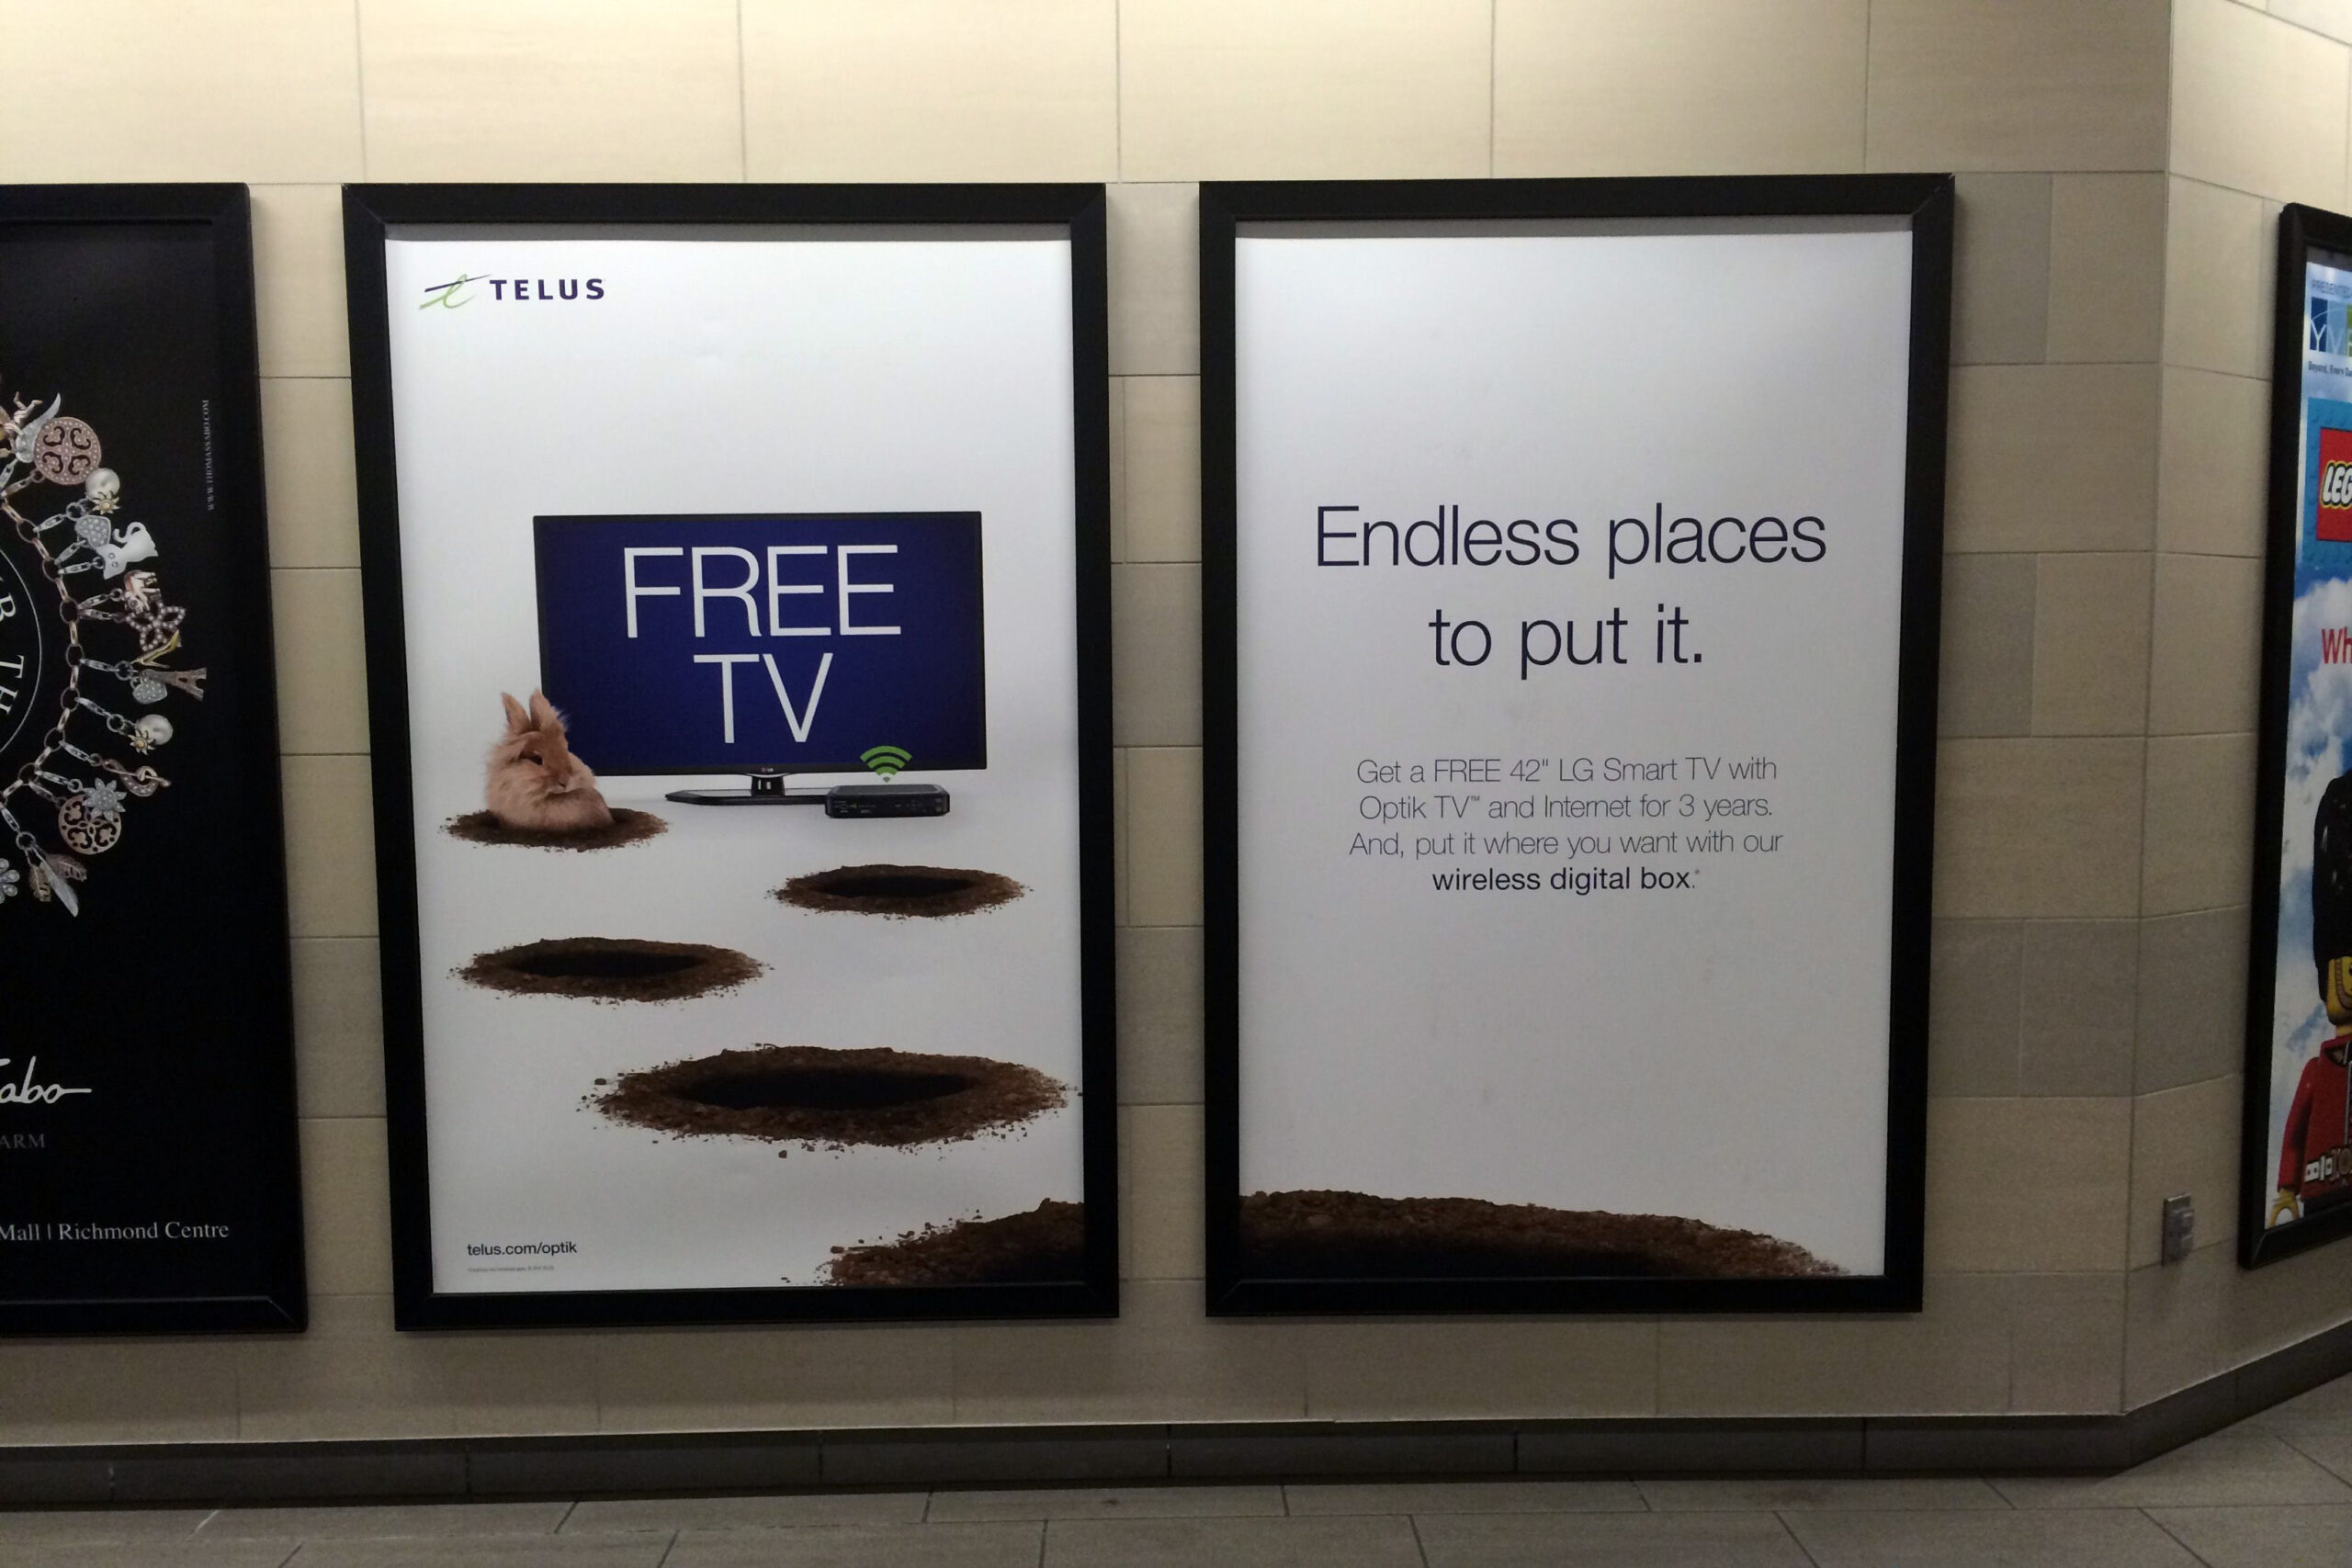 Free #Telus Tv? Agreement Vs Bunny Hole. #Humour Makes Ads Memorable regarding Fascinating Television Advertising Contract Agreement